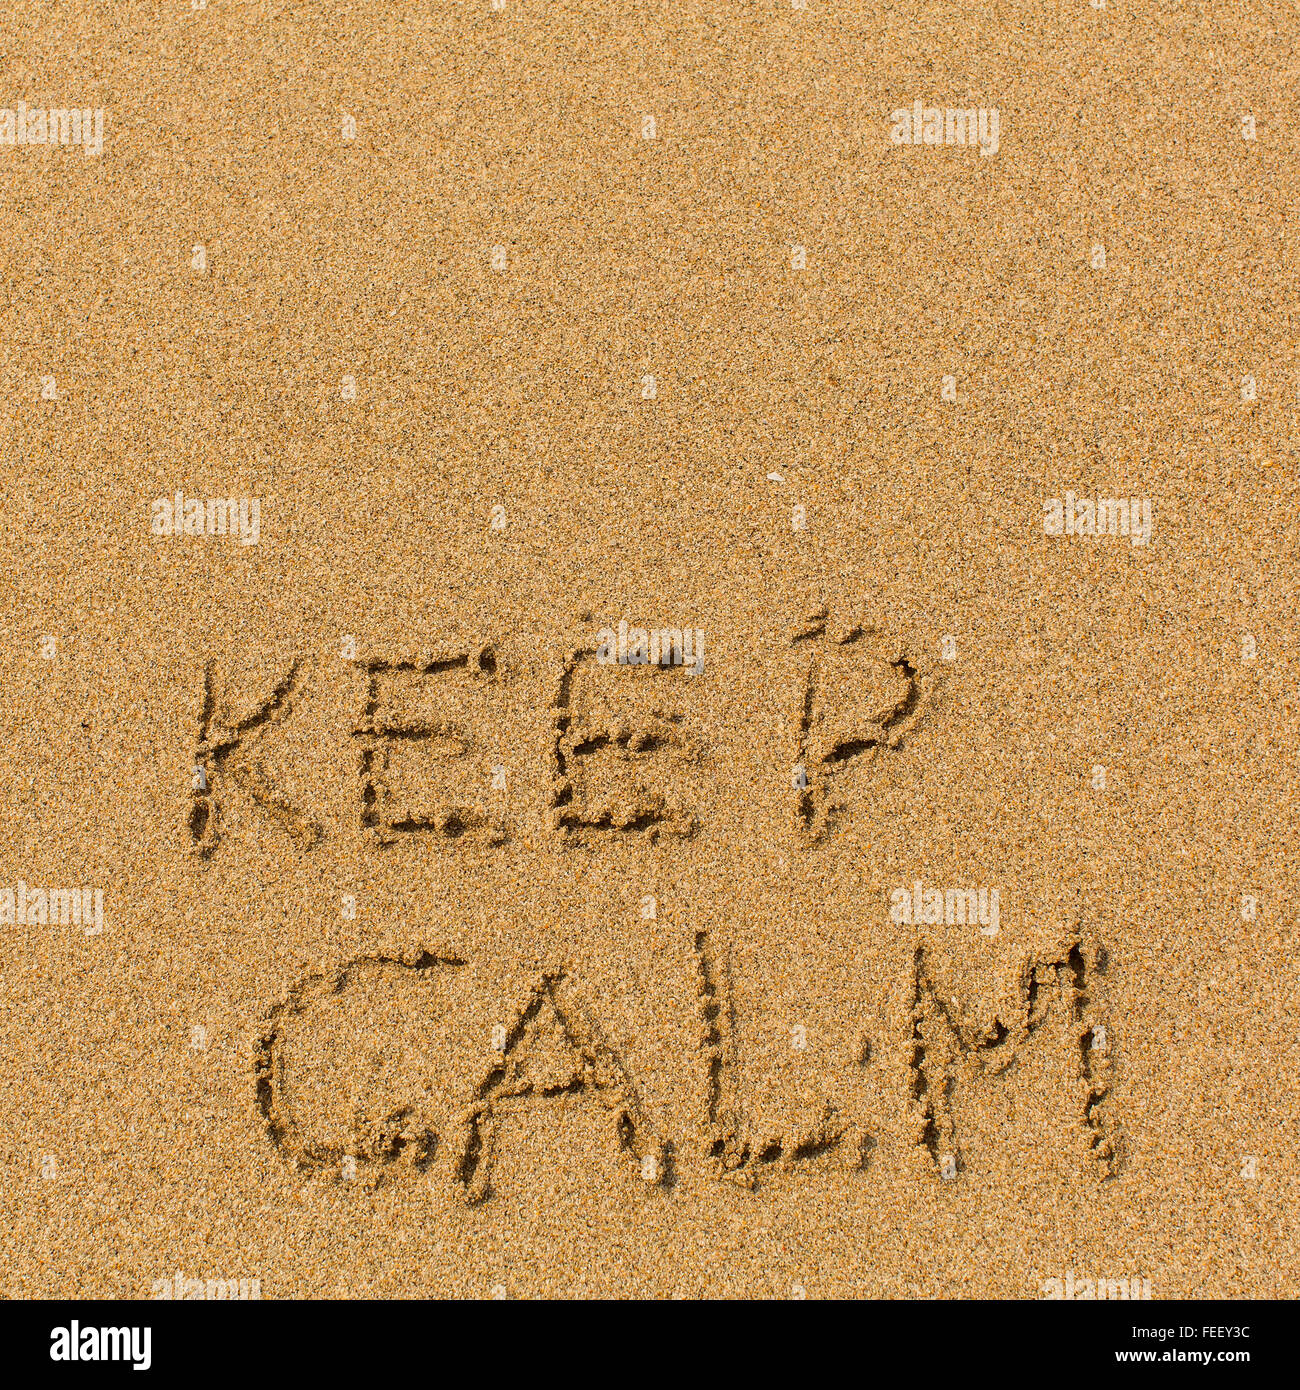 Keep calm - text written on sandy beach. Background, texture of the sand. Stock Photo